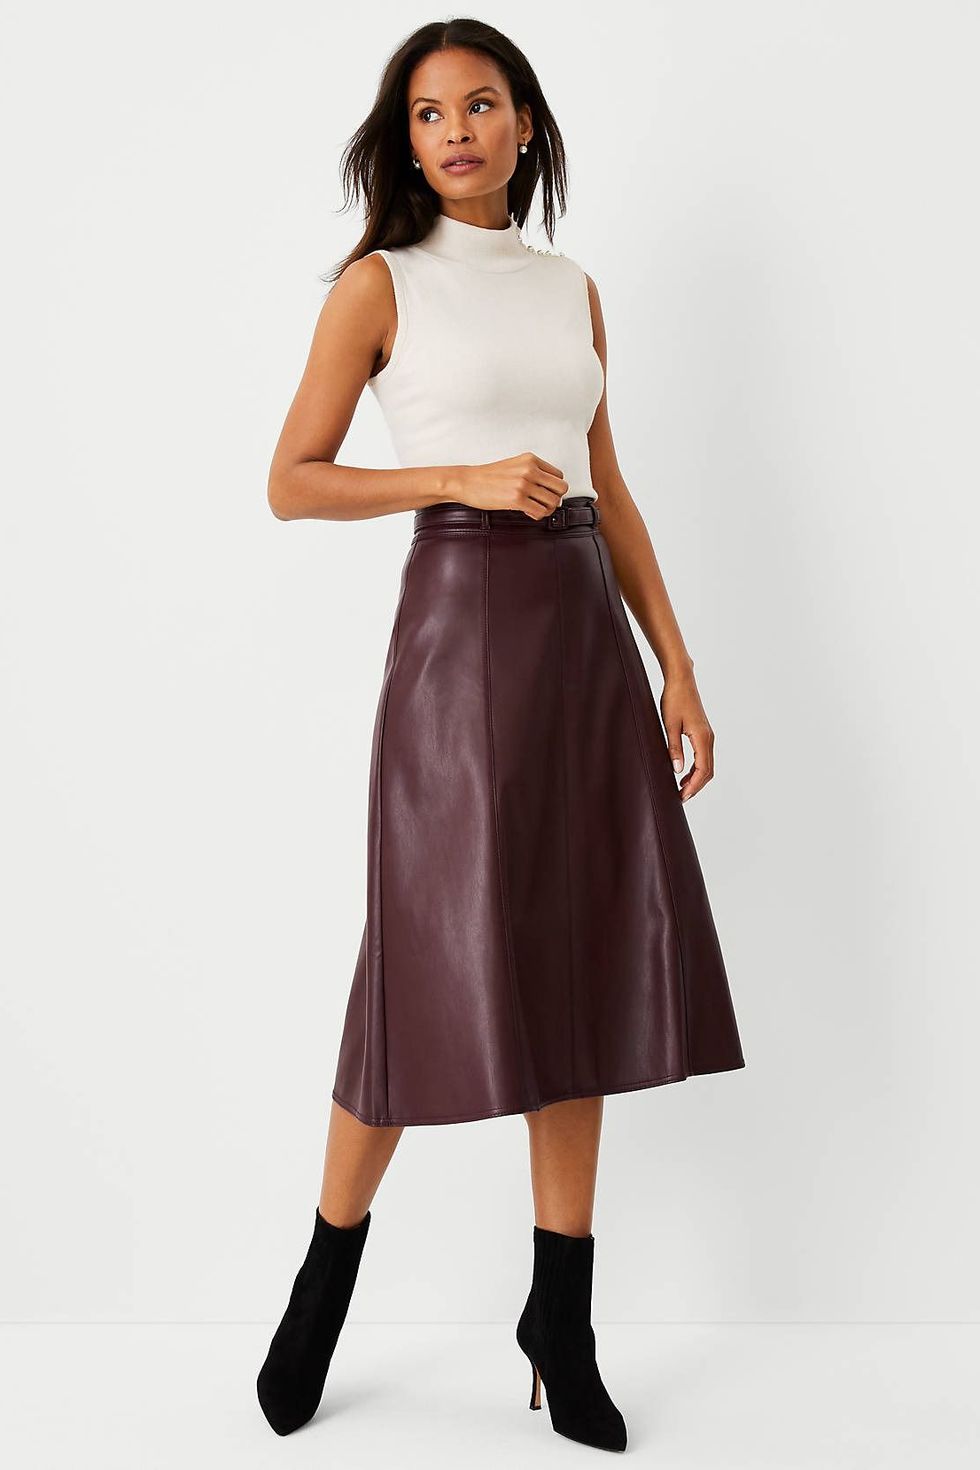 Must Have Faux Leather Skirt Outfits to Wear